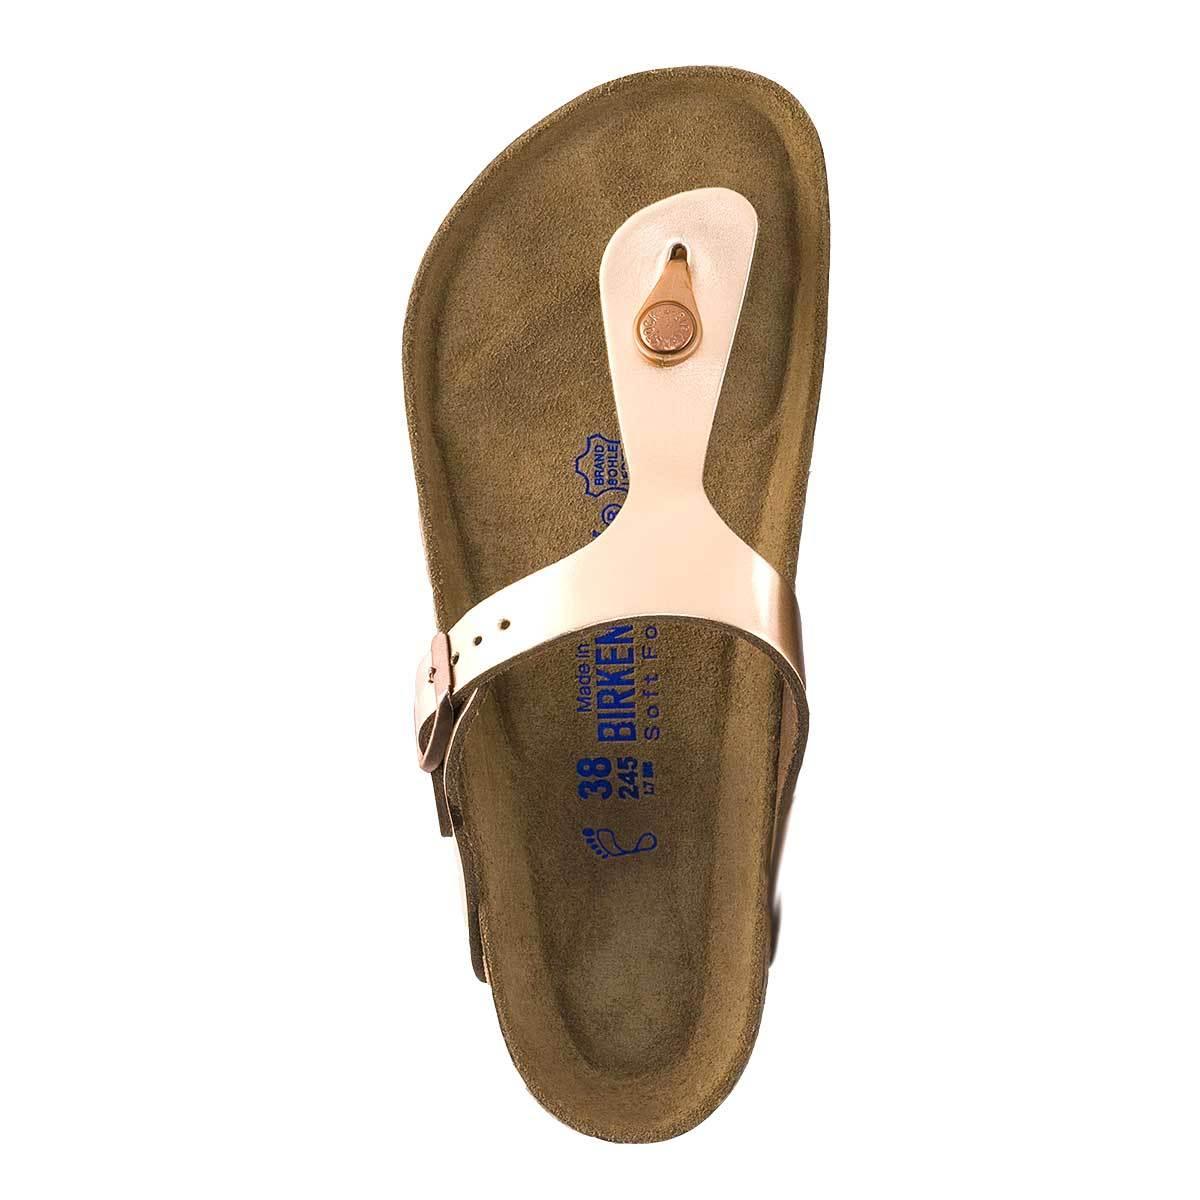 Birkenstock Gizeh Soft Footbed Natural Leather Sandals - Narrow - The Next Pair